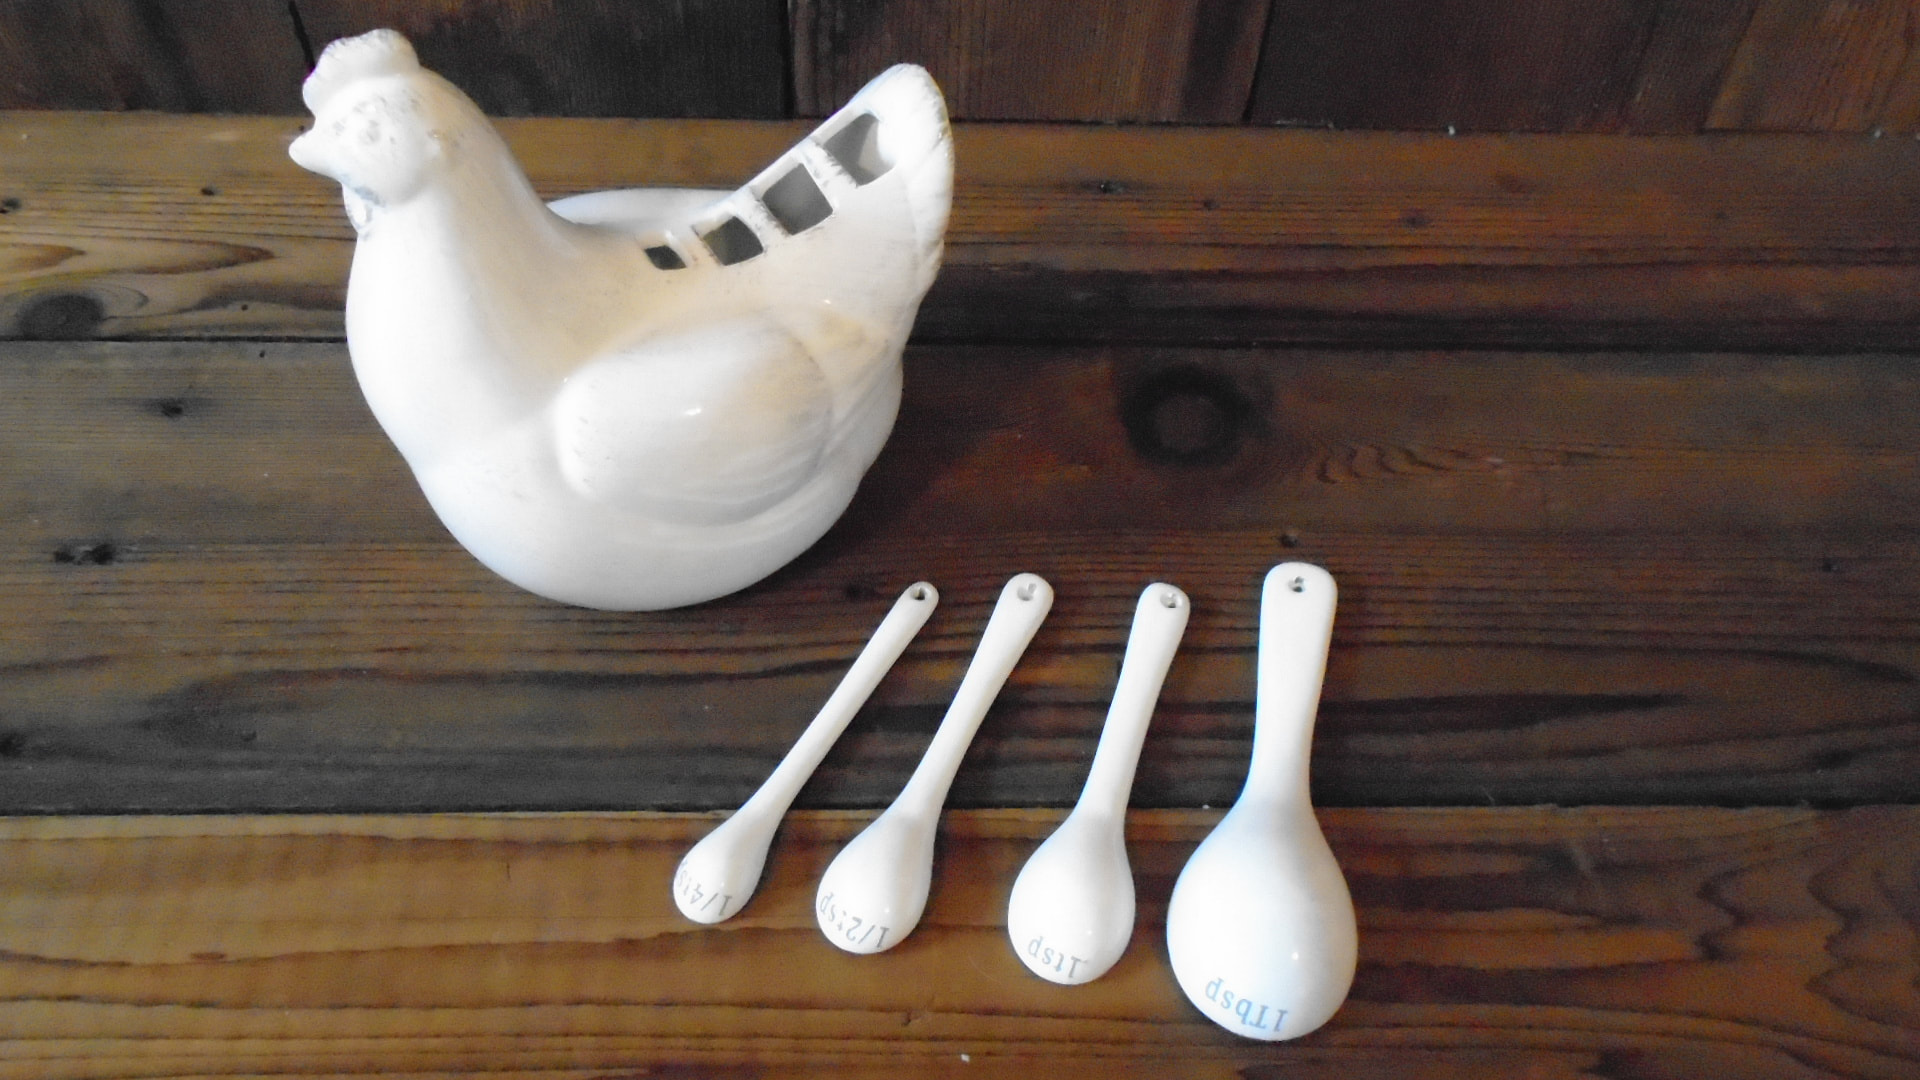  Bits and Pieces - Ceramic Chicken Measuring Spoons